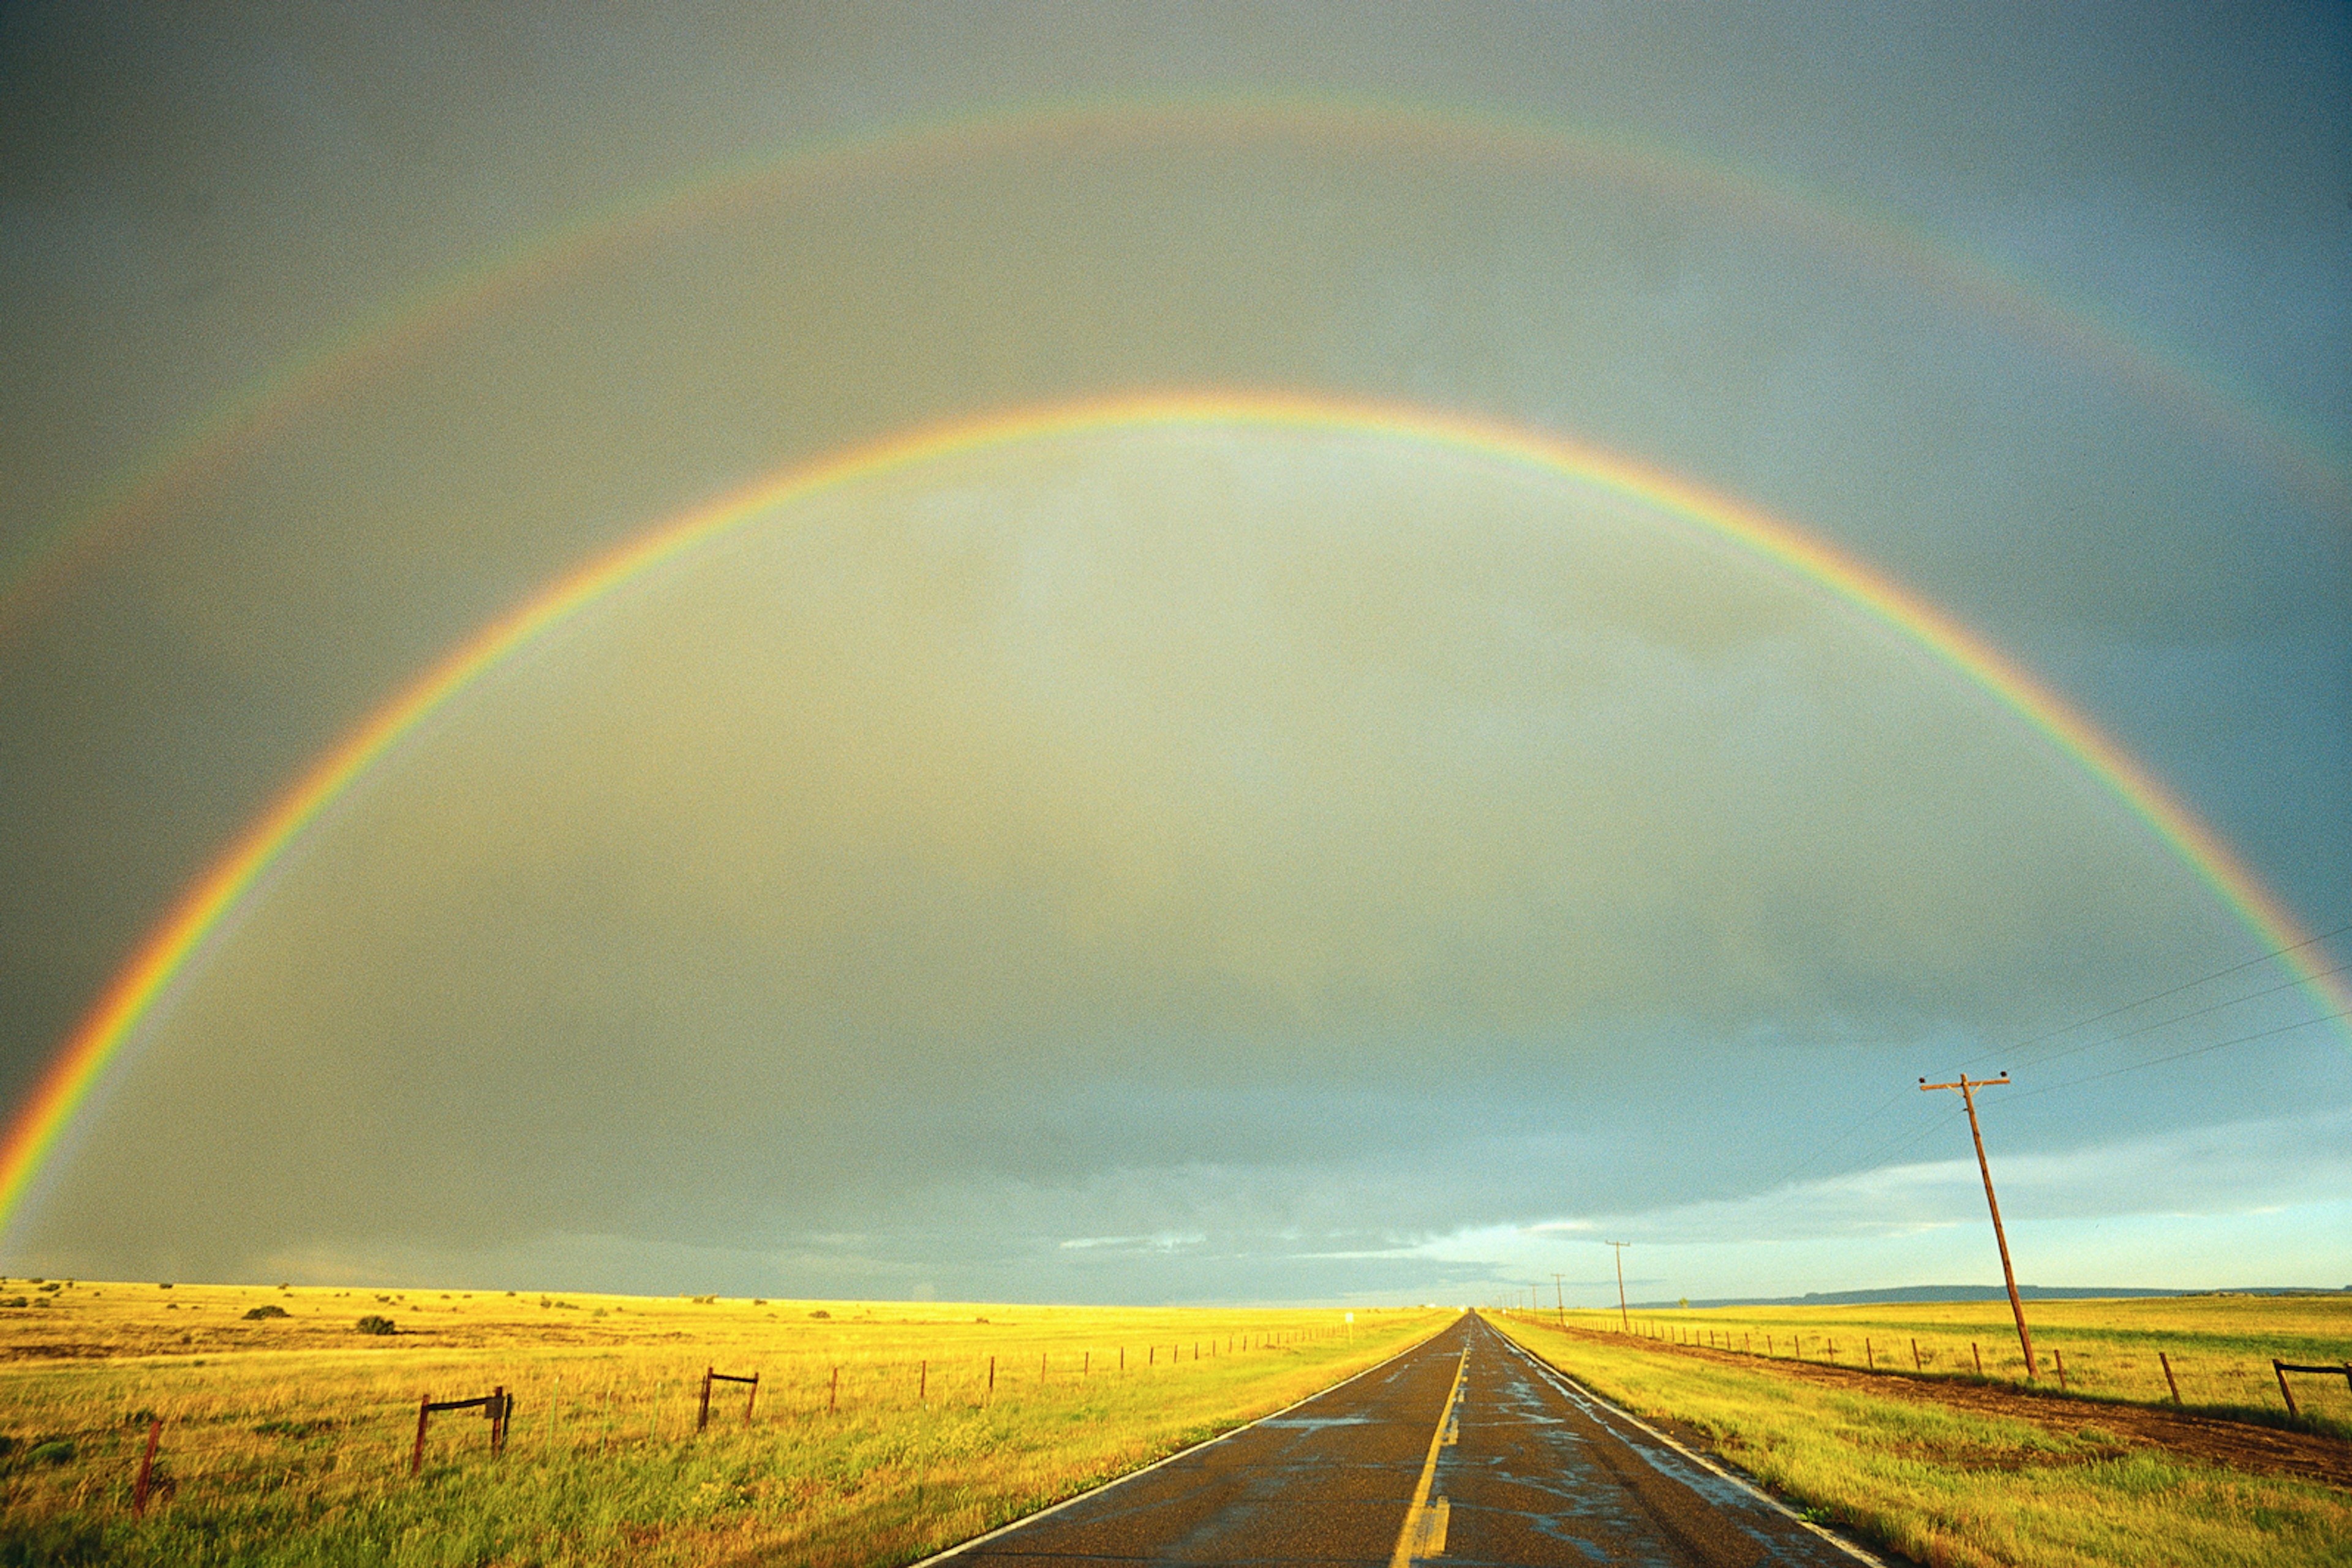 A rainbow stretches over a country road. Image by Fuse / Getty